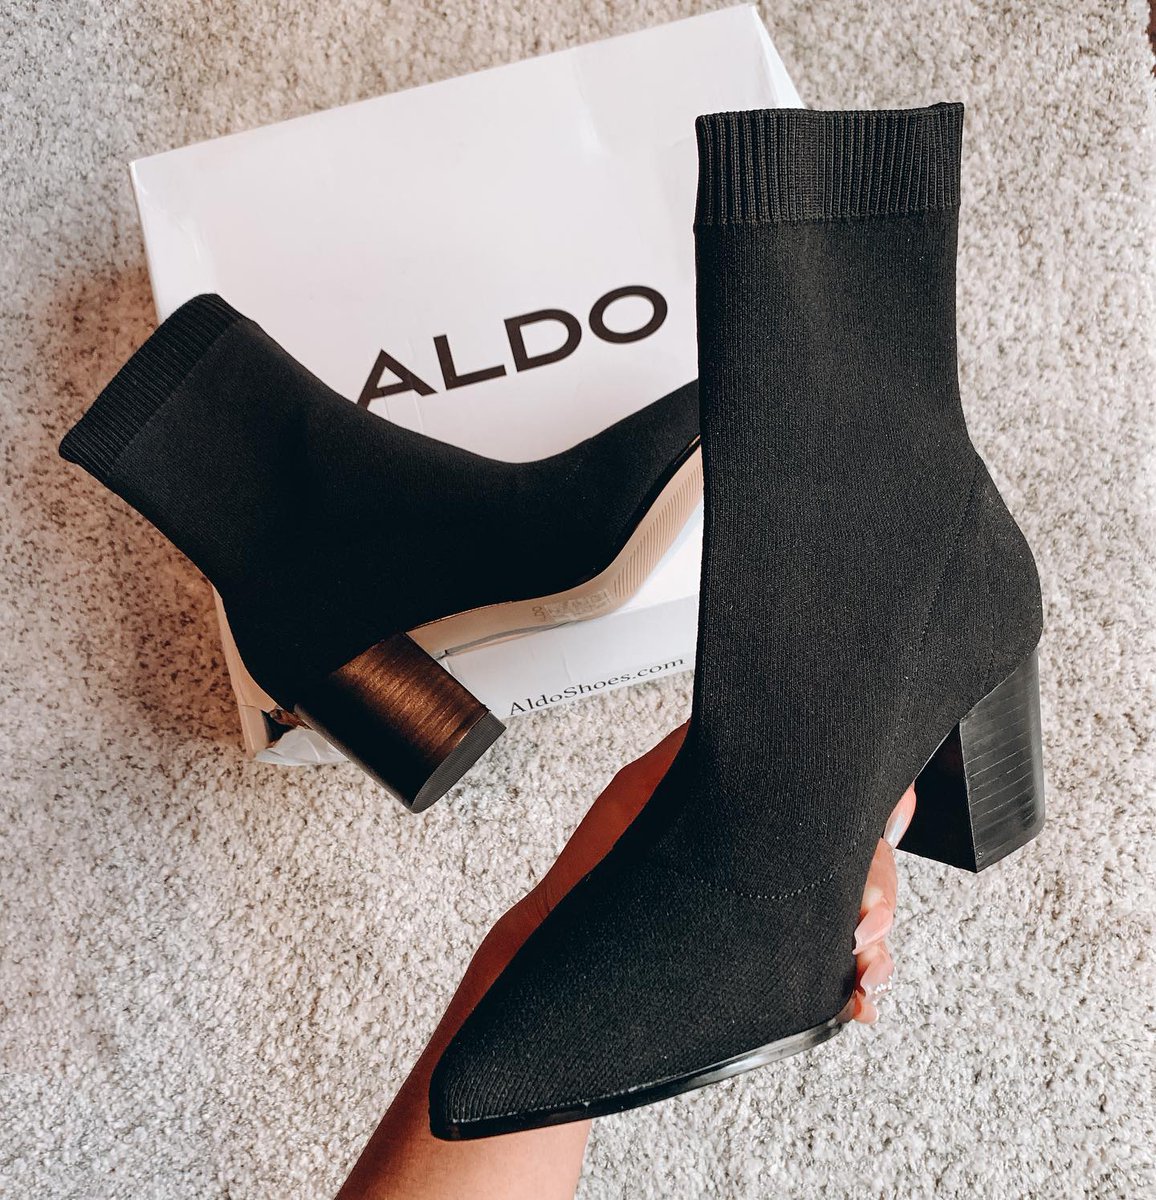 ALDO Shoes on Twitter: "It may not be #fall2020 yet but never too soon to get your wardrobe ready. What's your favorite season for #fashion? https://t.co/qgw7491Rv2" / Twitter